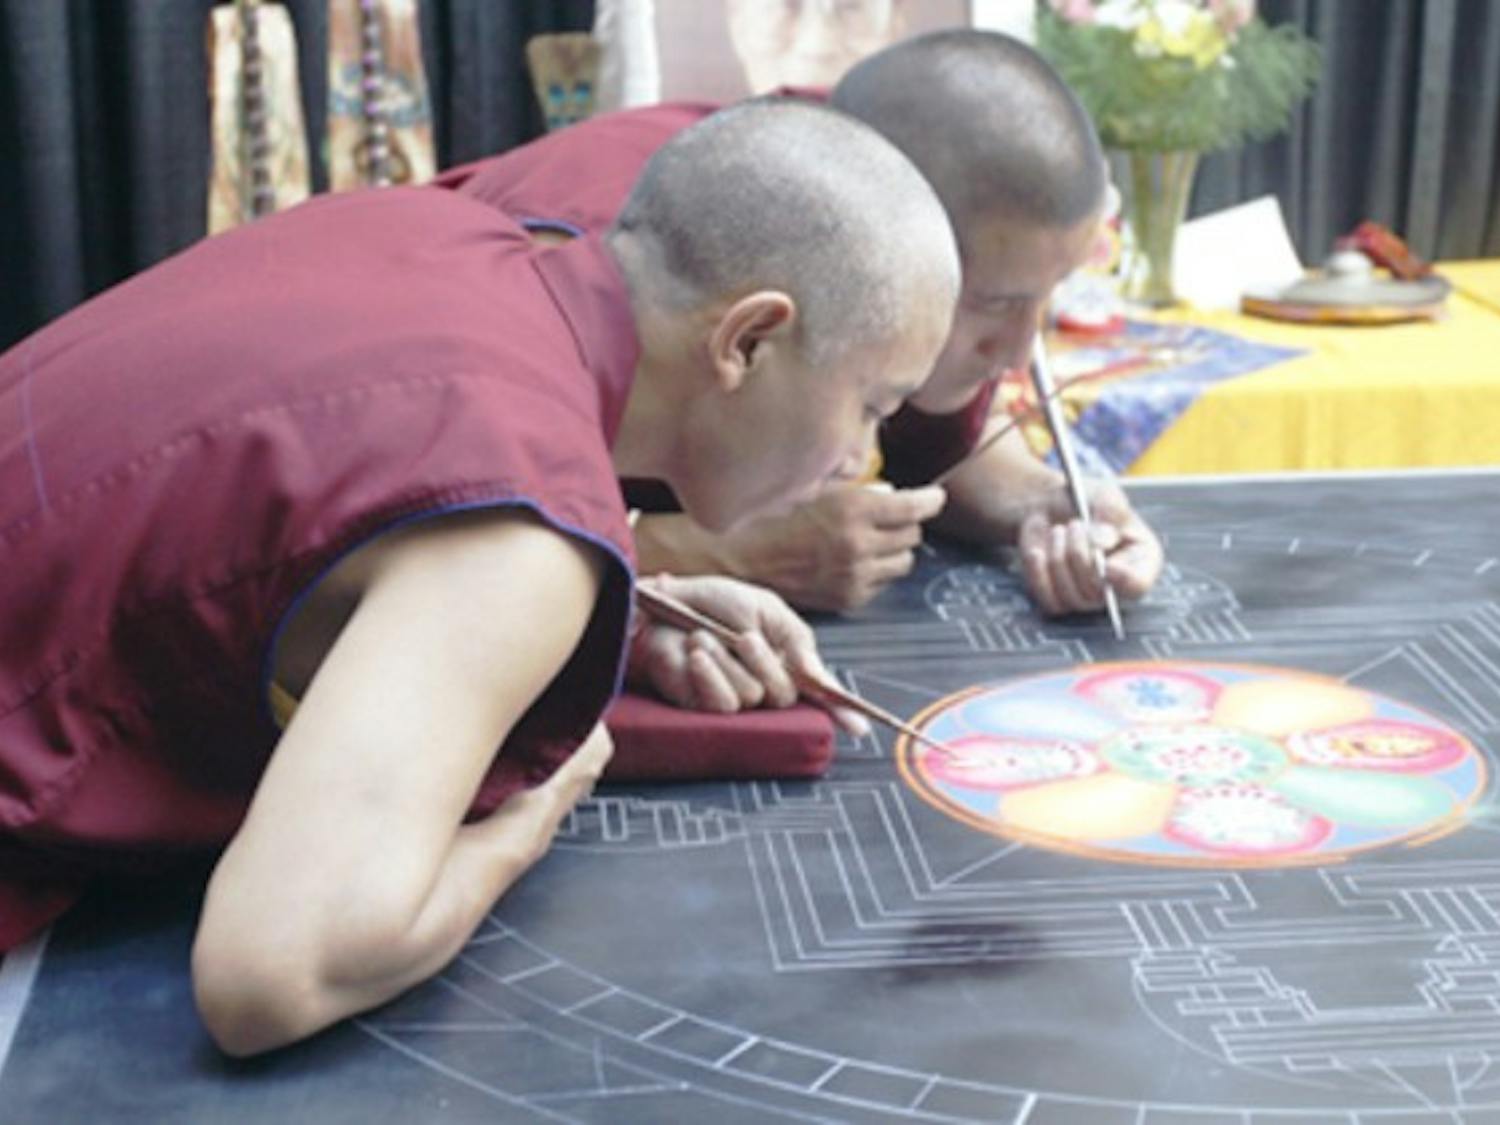 The mandala, which the monks ultimately released into the Connecticut River, is used to symbolize the transitory nature of material things and is a reminder of the discipline associated with Buddhism.